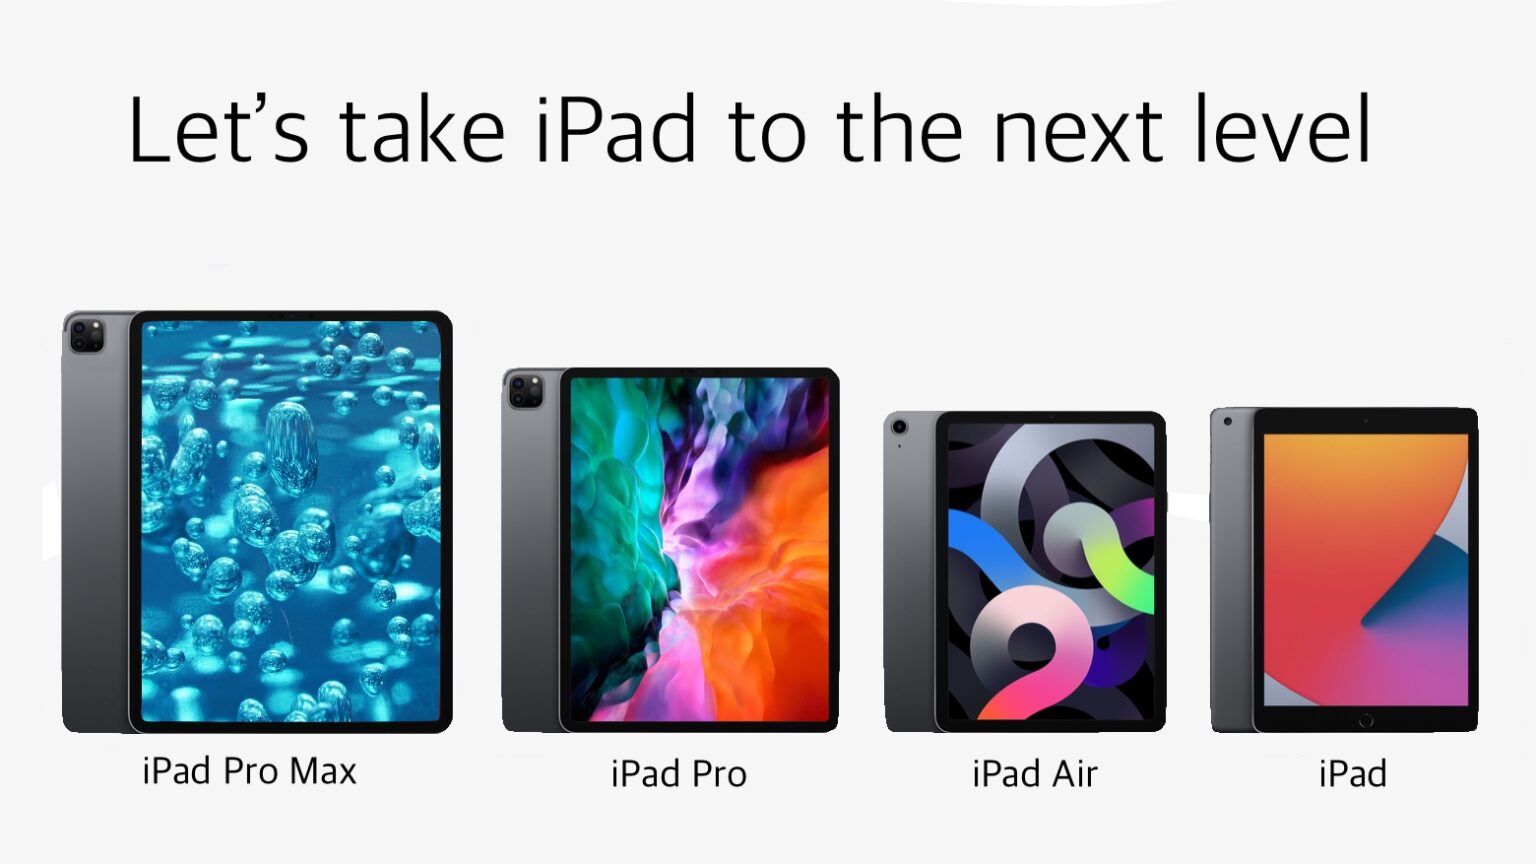 iPad Pro Max: It’s time to take iPad to the next level